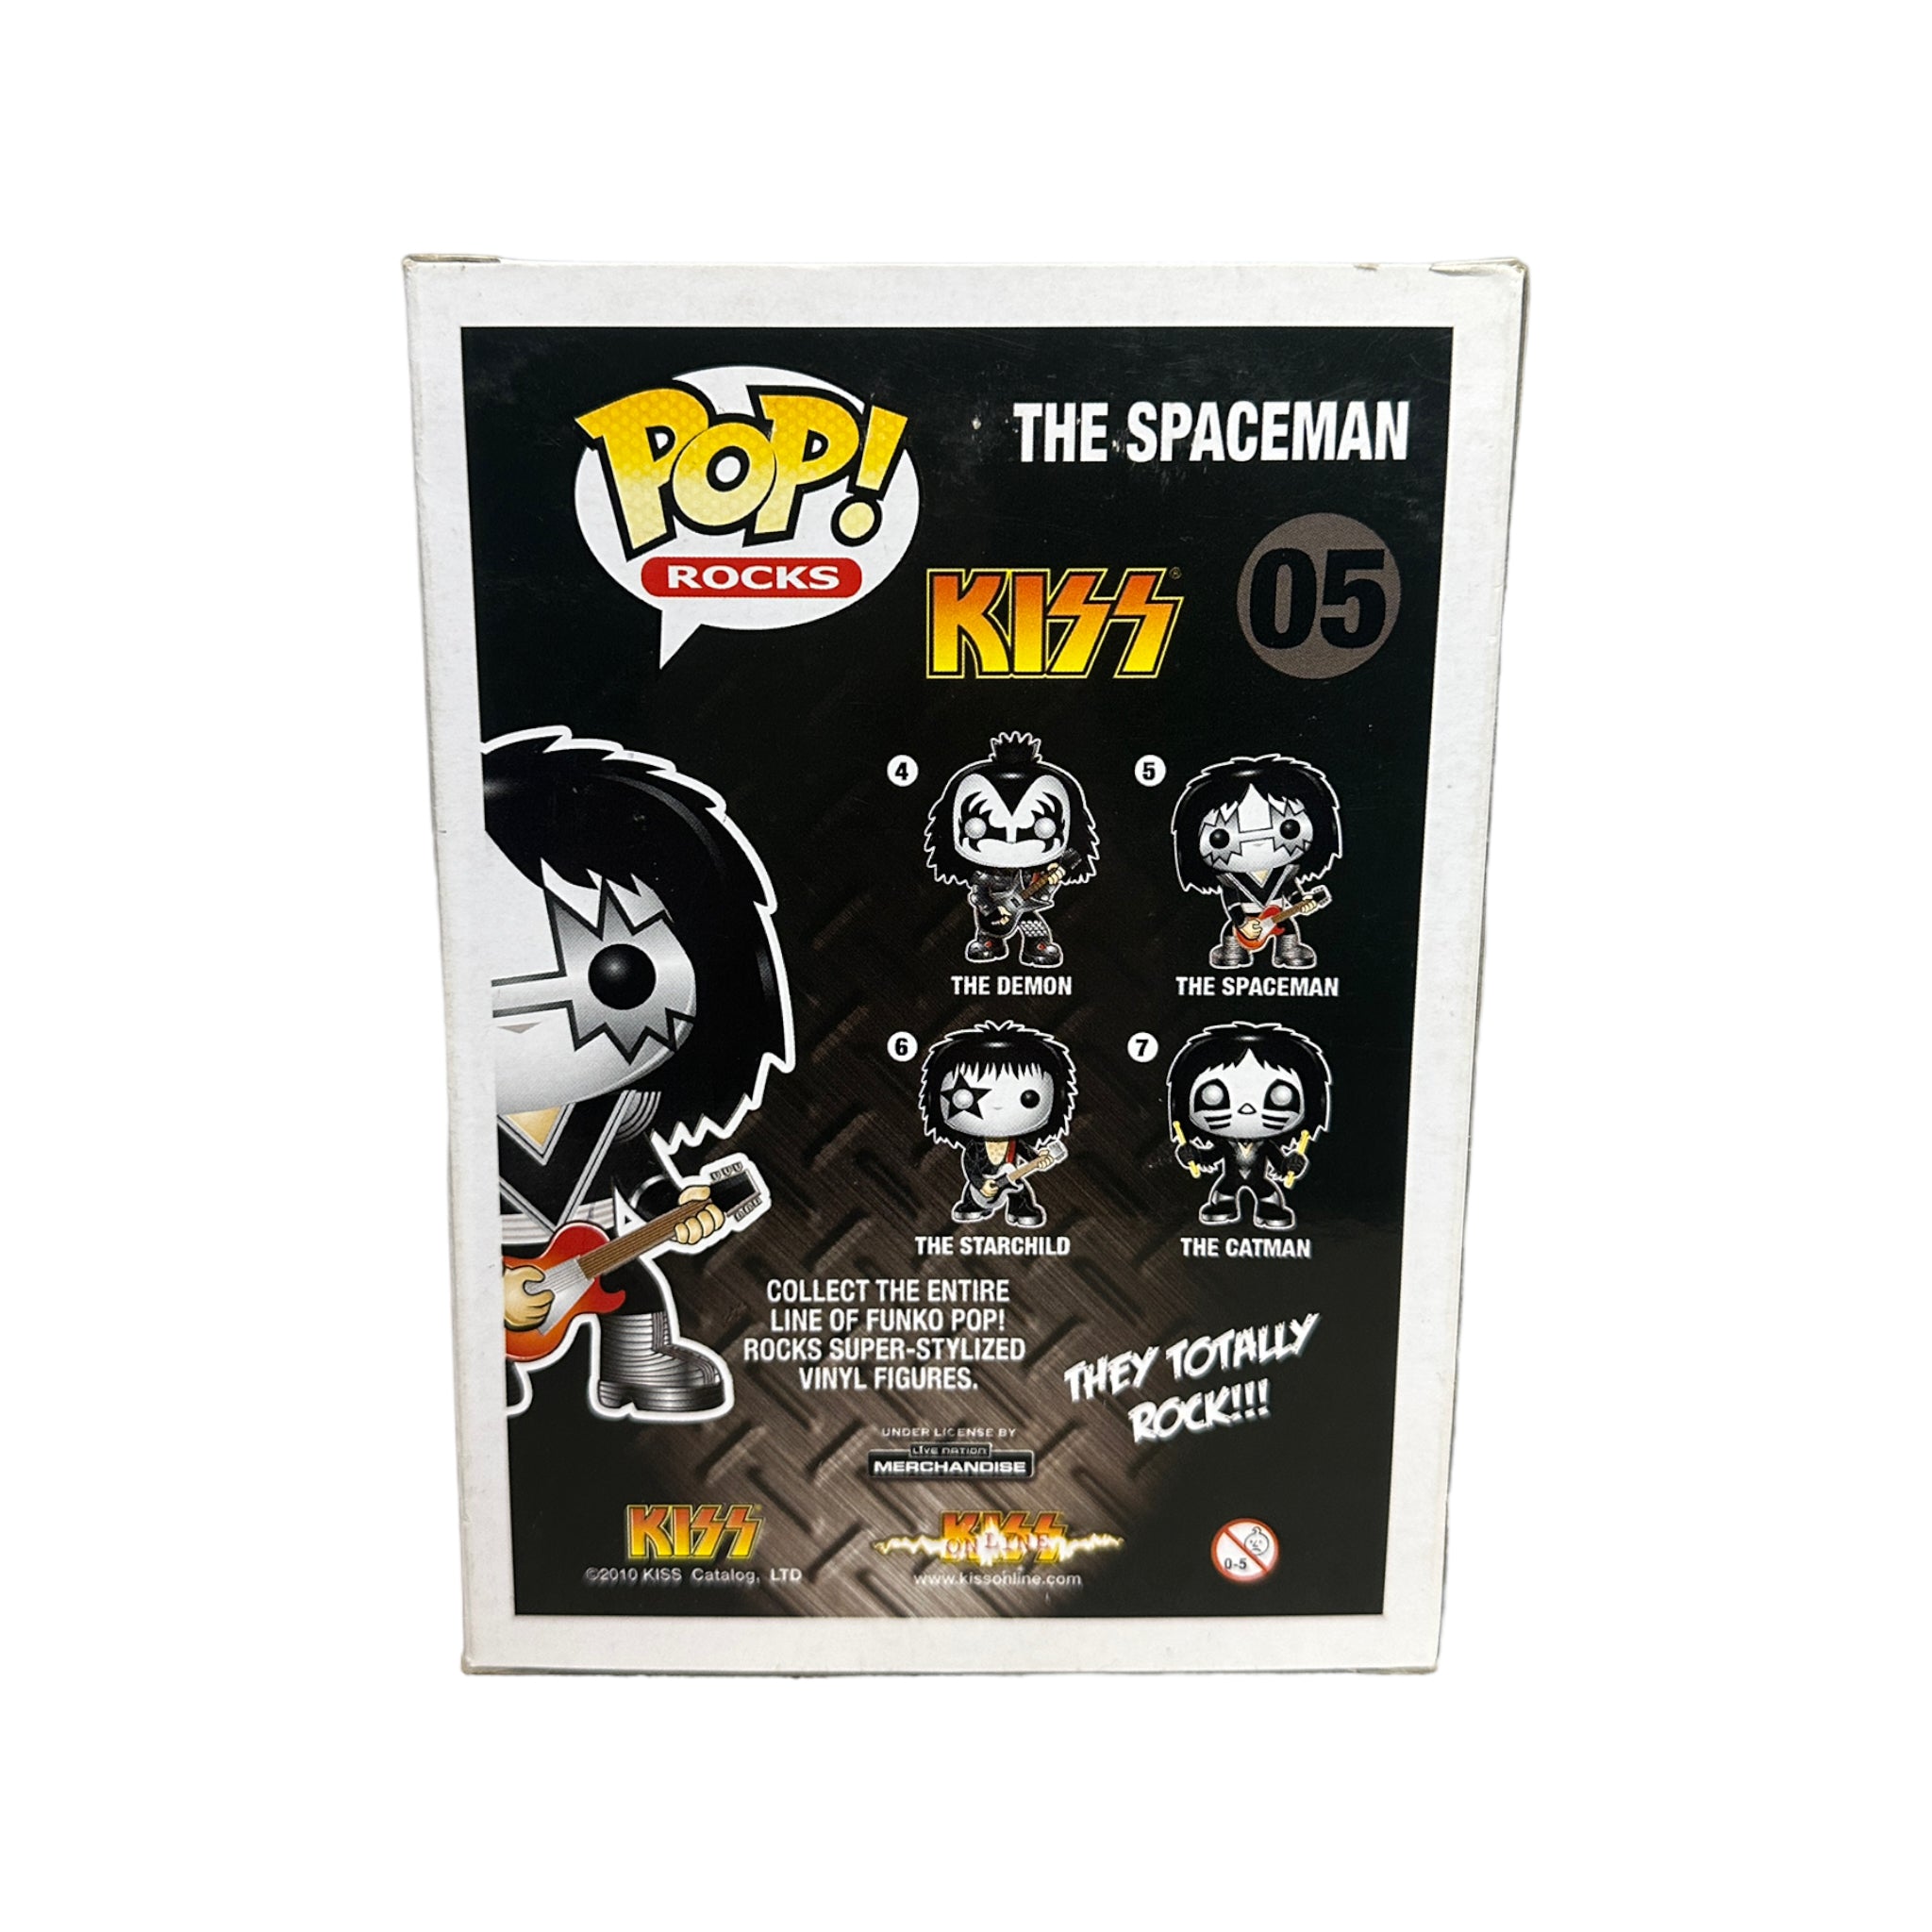 The Spaceman #05 (Glow Chase) Funko Pop! - Kiss - 2011 Pop! - Condition 6.5/10